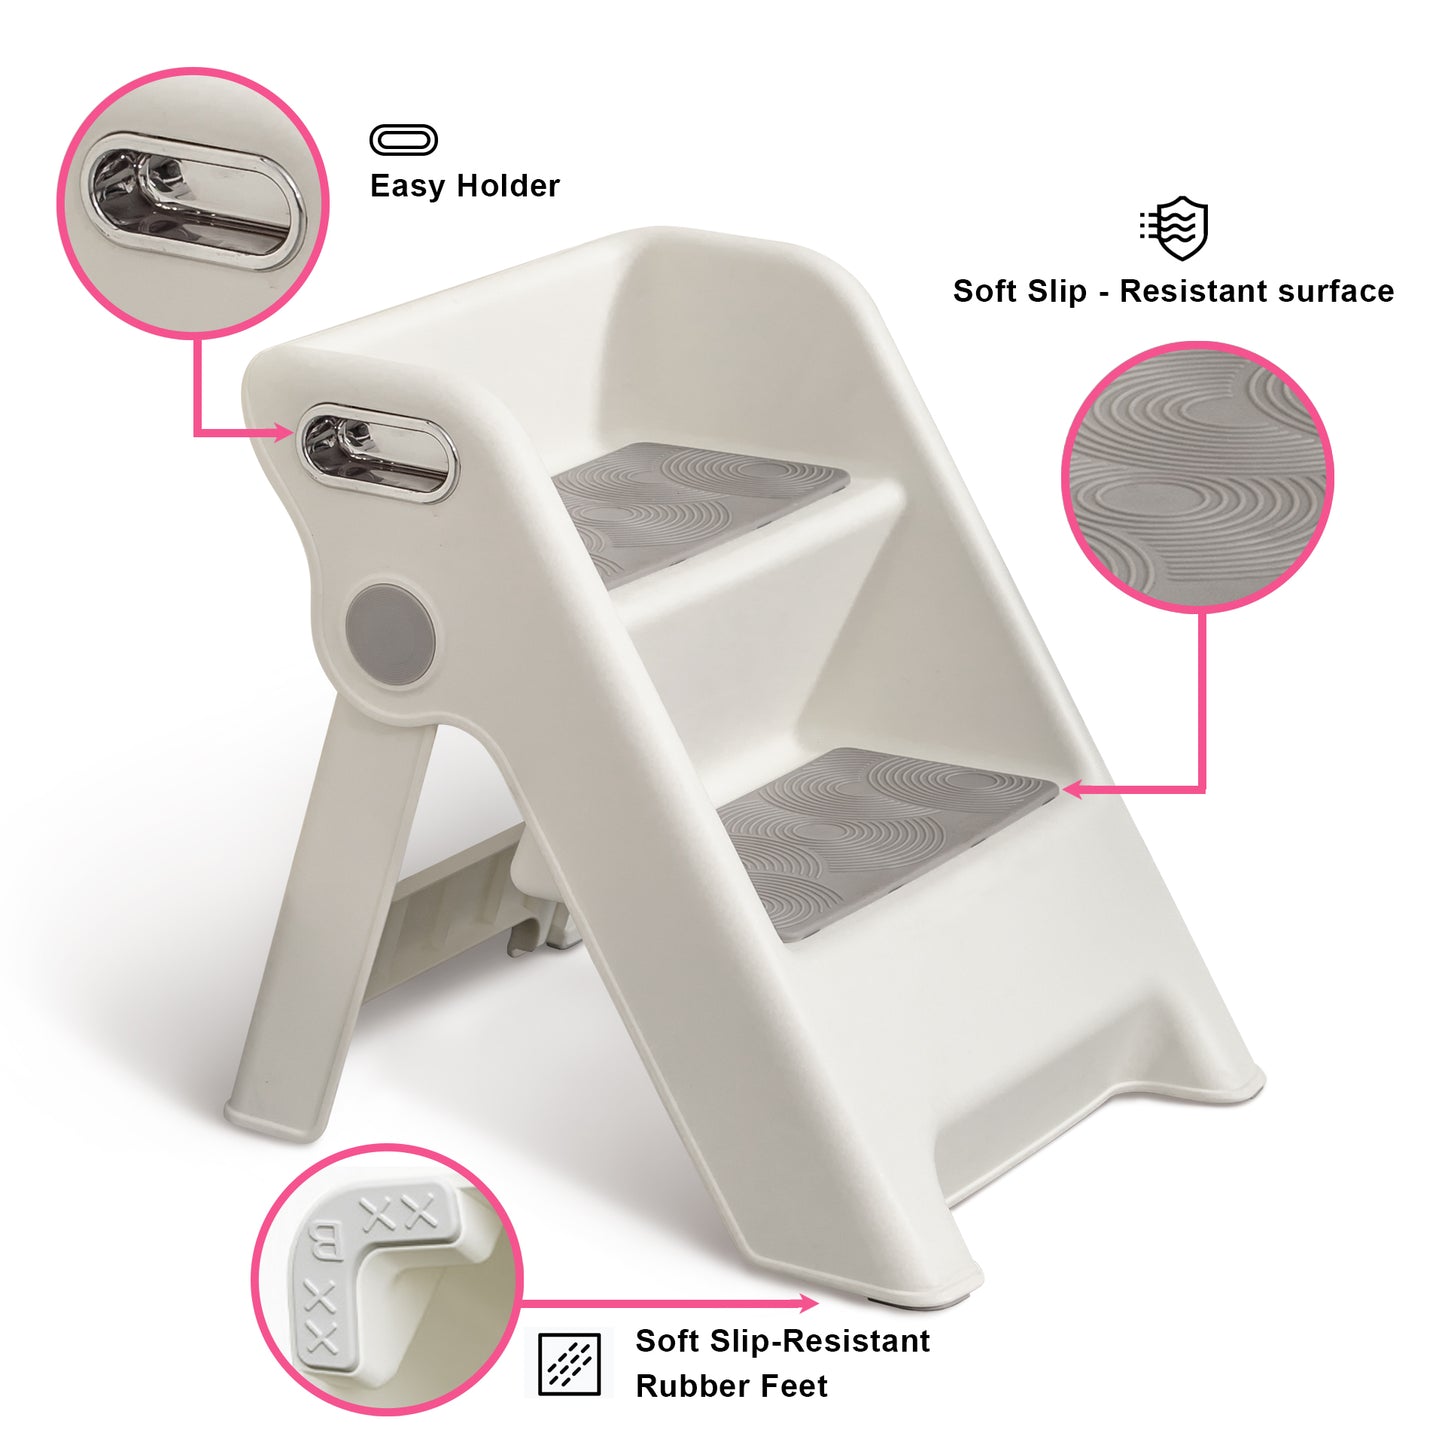 UNCLE WU Step Stool for Kids - Folding 2 Step Stool for Bathroom Sink -Kids Toilet Potty Training Stool with Handles -Anti-Slip Sturdy Step Ladder for Kitchen Helper,Bathroom,Bedroom